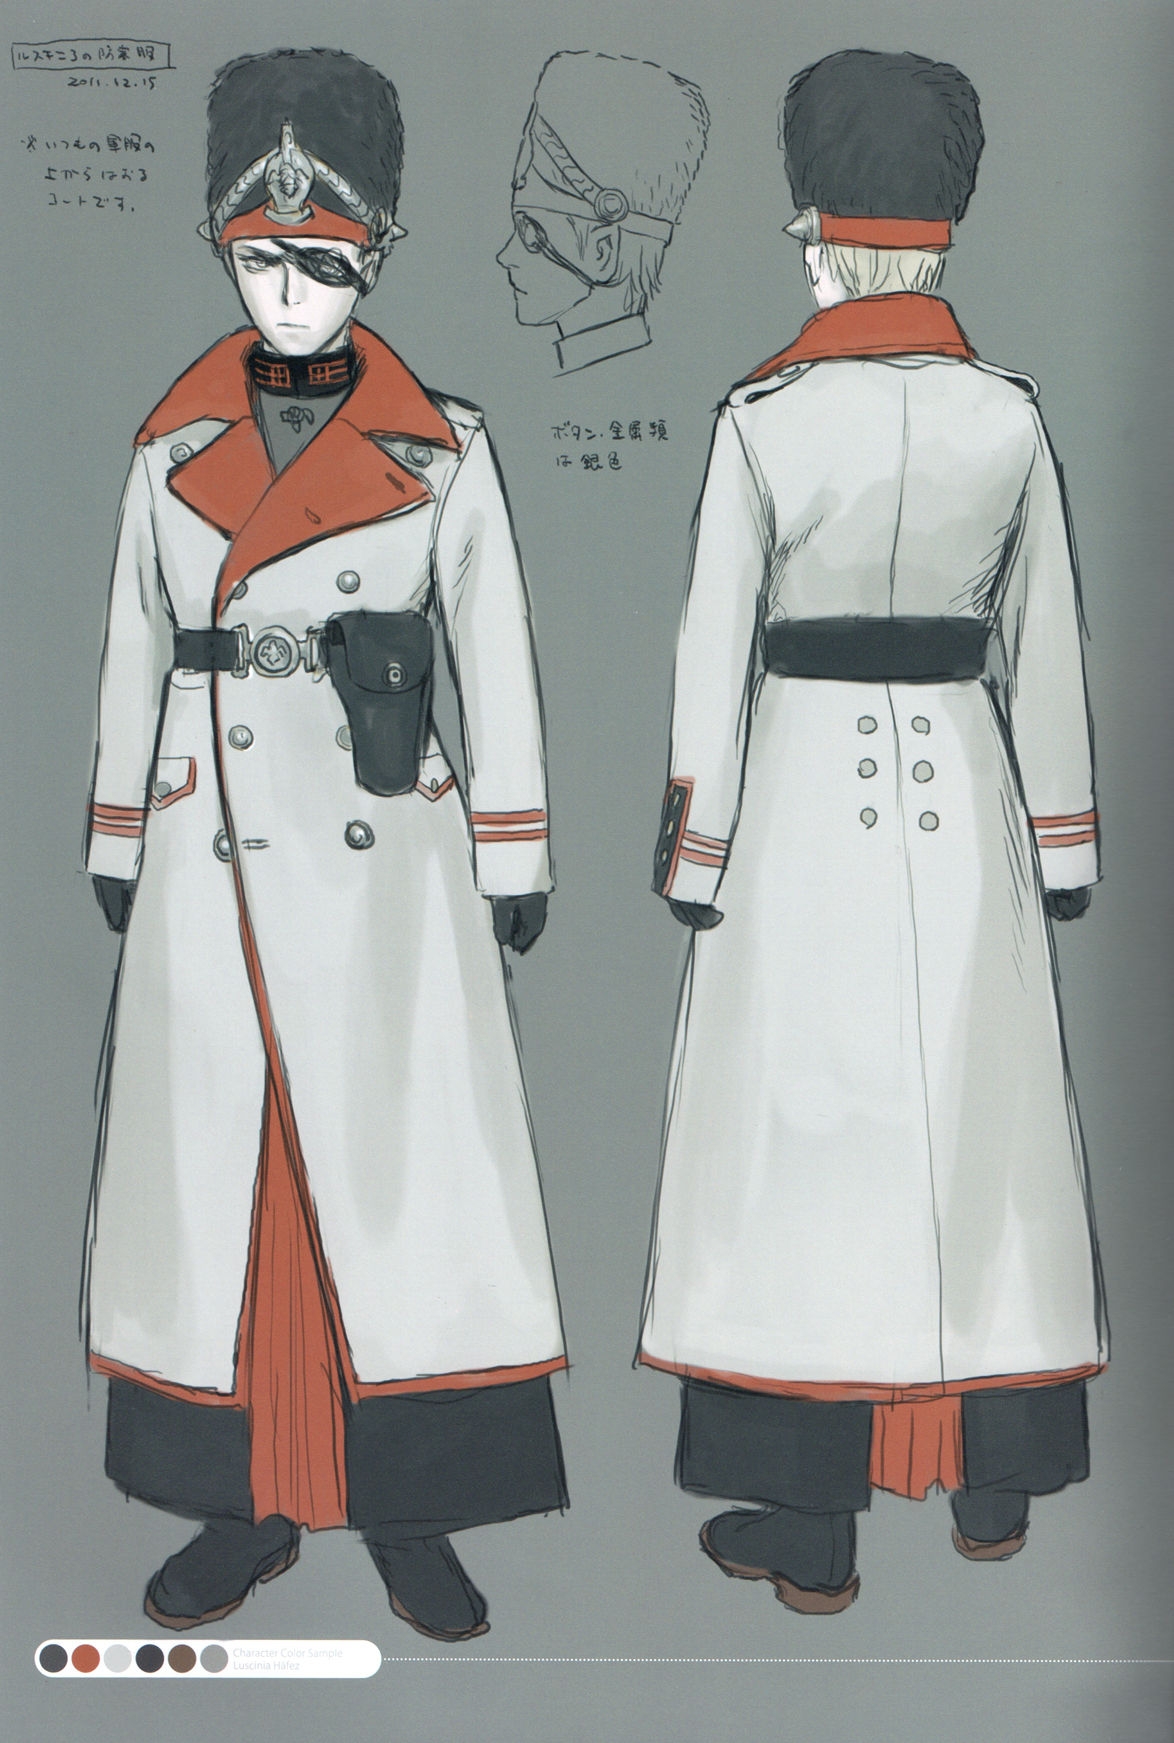 [Pasta's Estab (Range Murata)] Linkage - Last Exile ~ Fam, The Silver Wing - Character Filegraphy 02 2